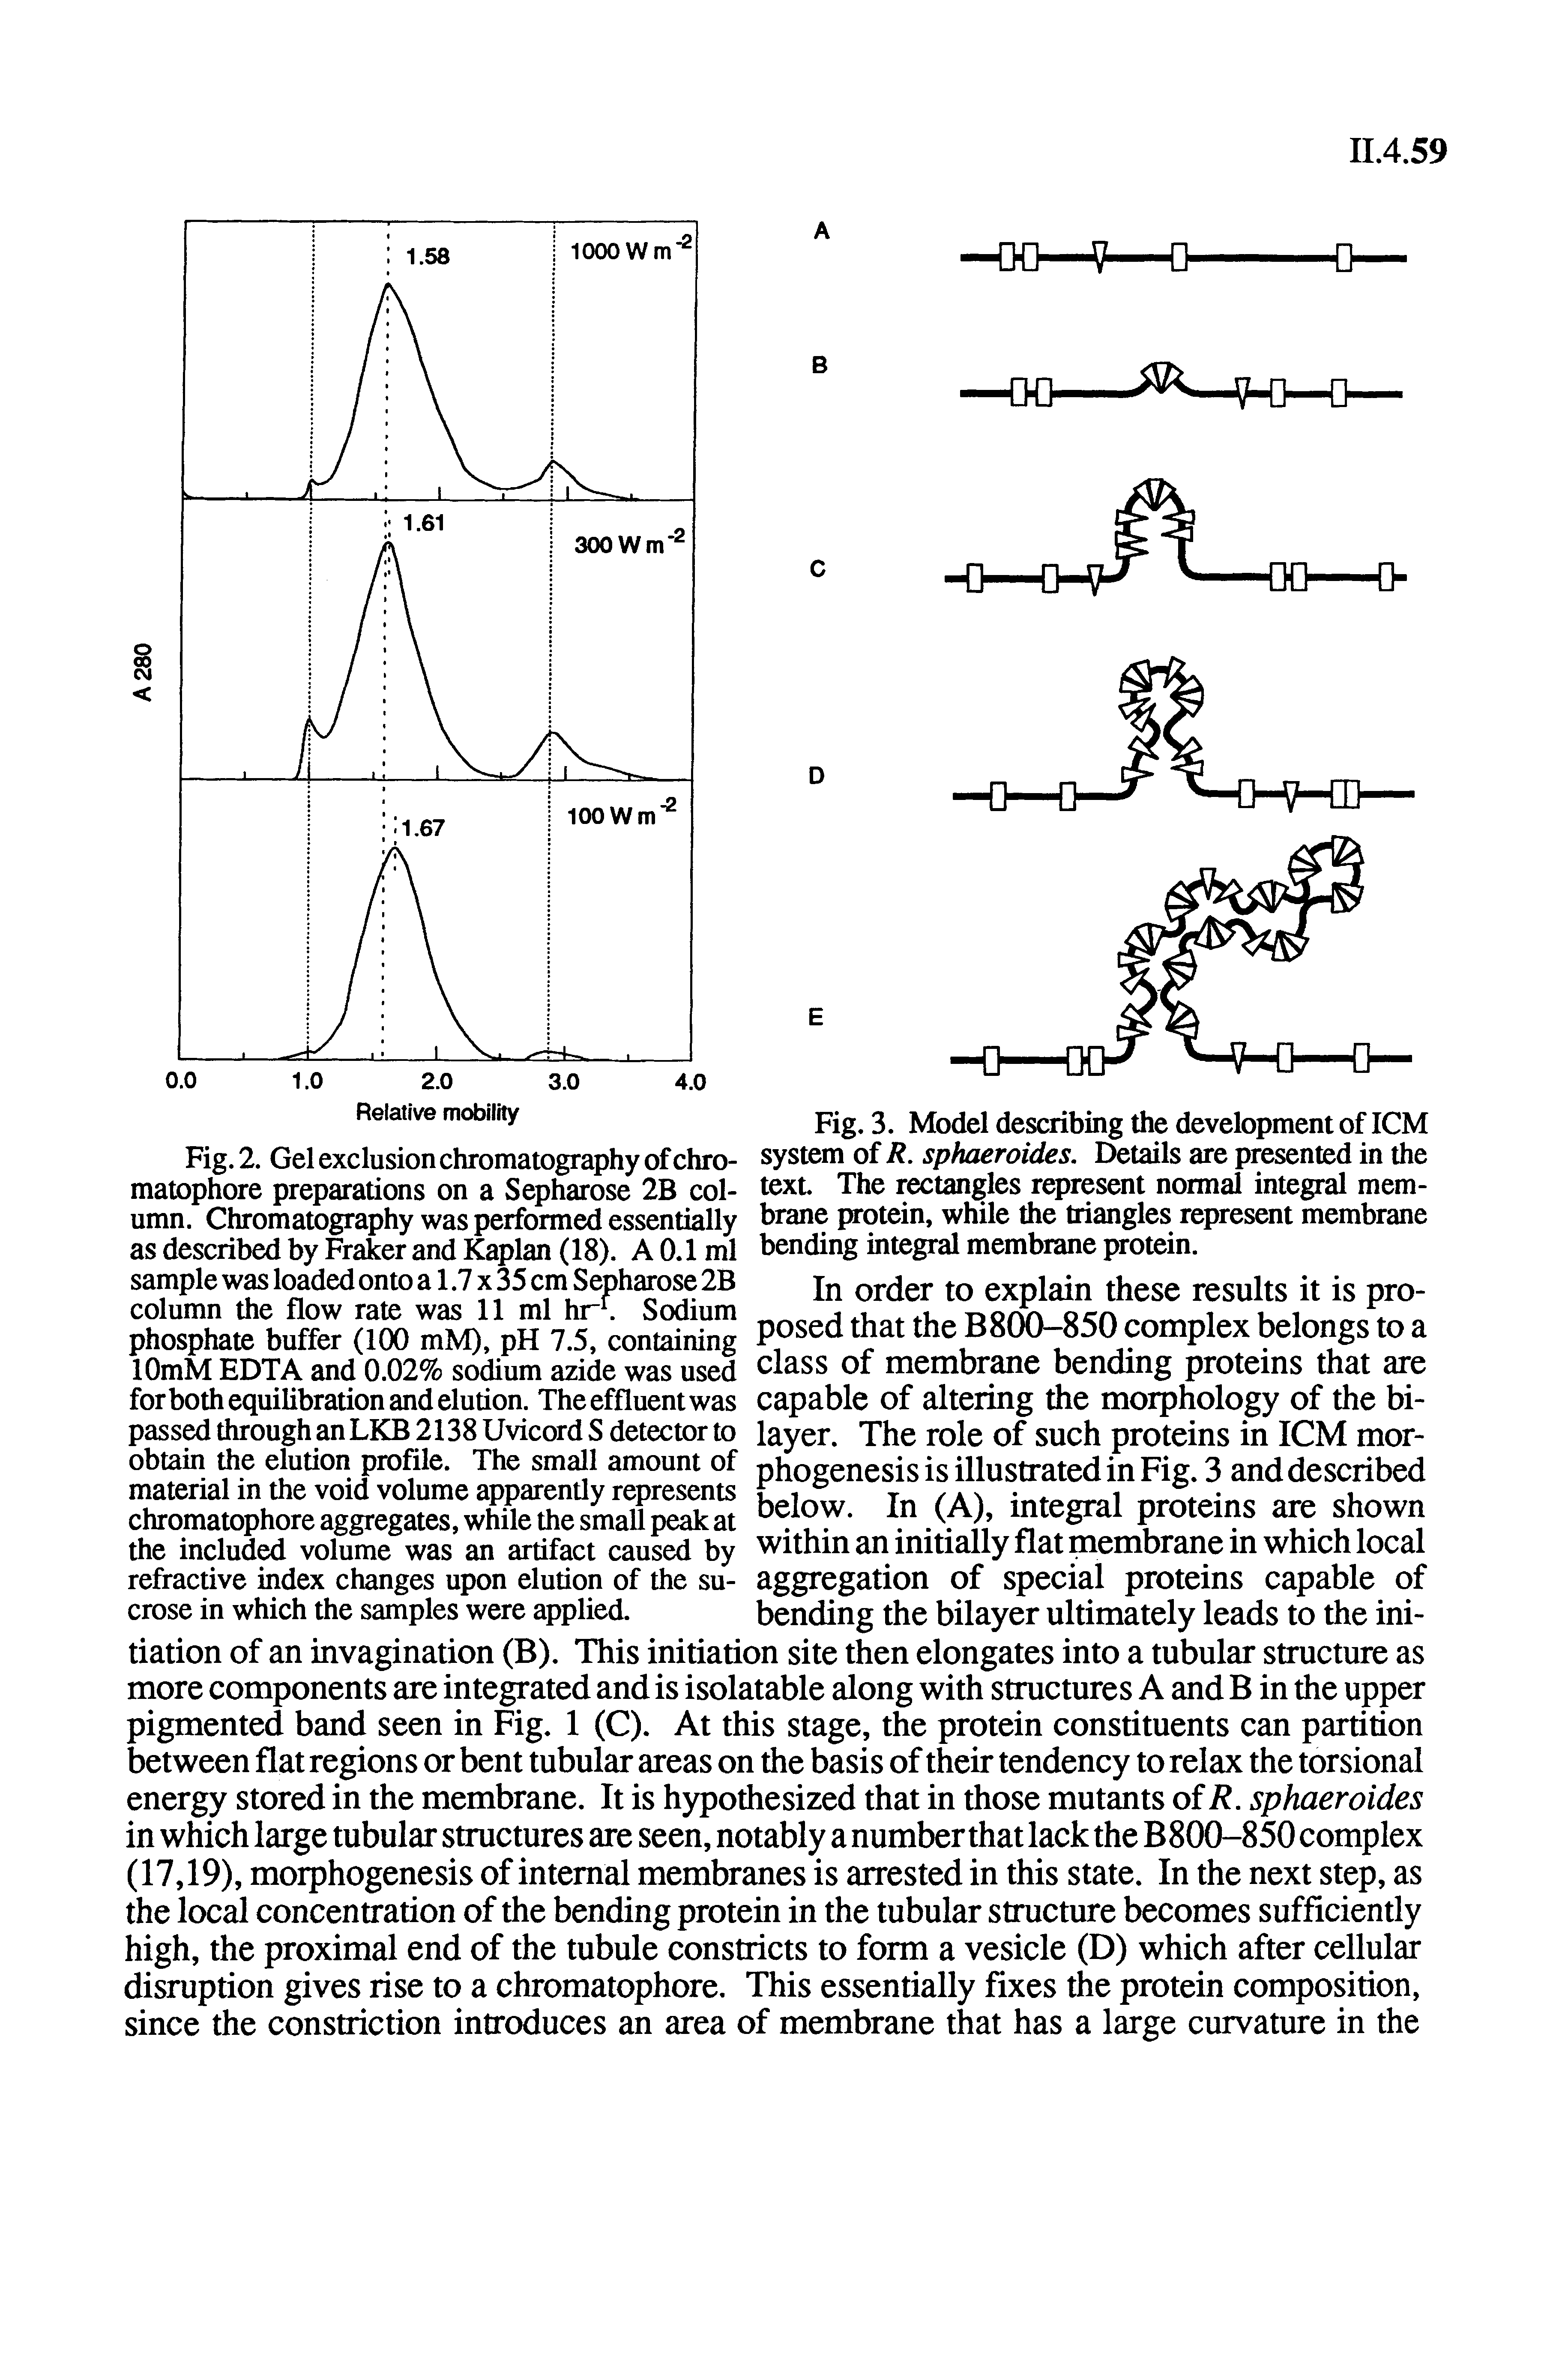 Fig. 2. Gel exclusion chromatography of chro-matophore preparations on a Sepharose 2B column. Chromatography was performed essentially as described by Fraker and Kaplan (18). A 0.1 ml sample was loaded onto a 1.7 x 35 cm Sepharose 2B column the flow rate was 11 ml hr Sodium phosphate buffer (100 mM), pH 7.5, containing lOmM EDTA and 0.02% soium azide was used for both equilibration and elution. The effluent was passed through an LKB 2138 Uvicord S detector to...